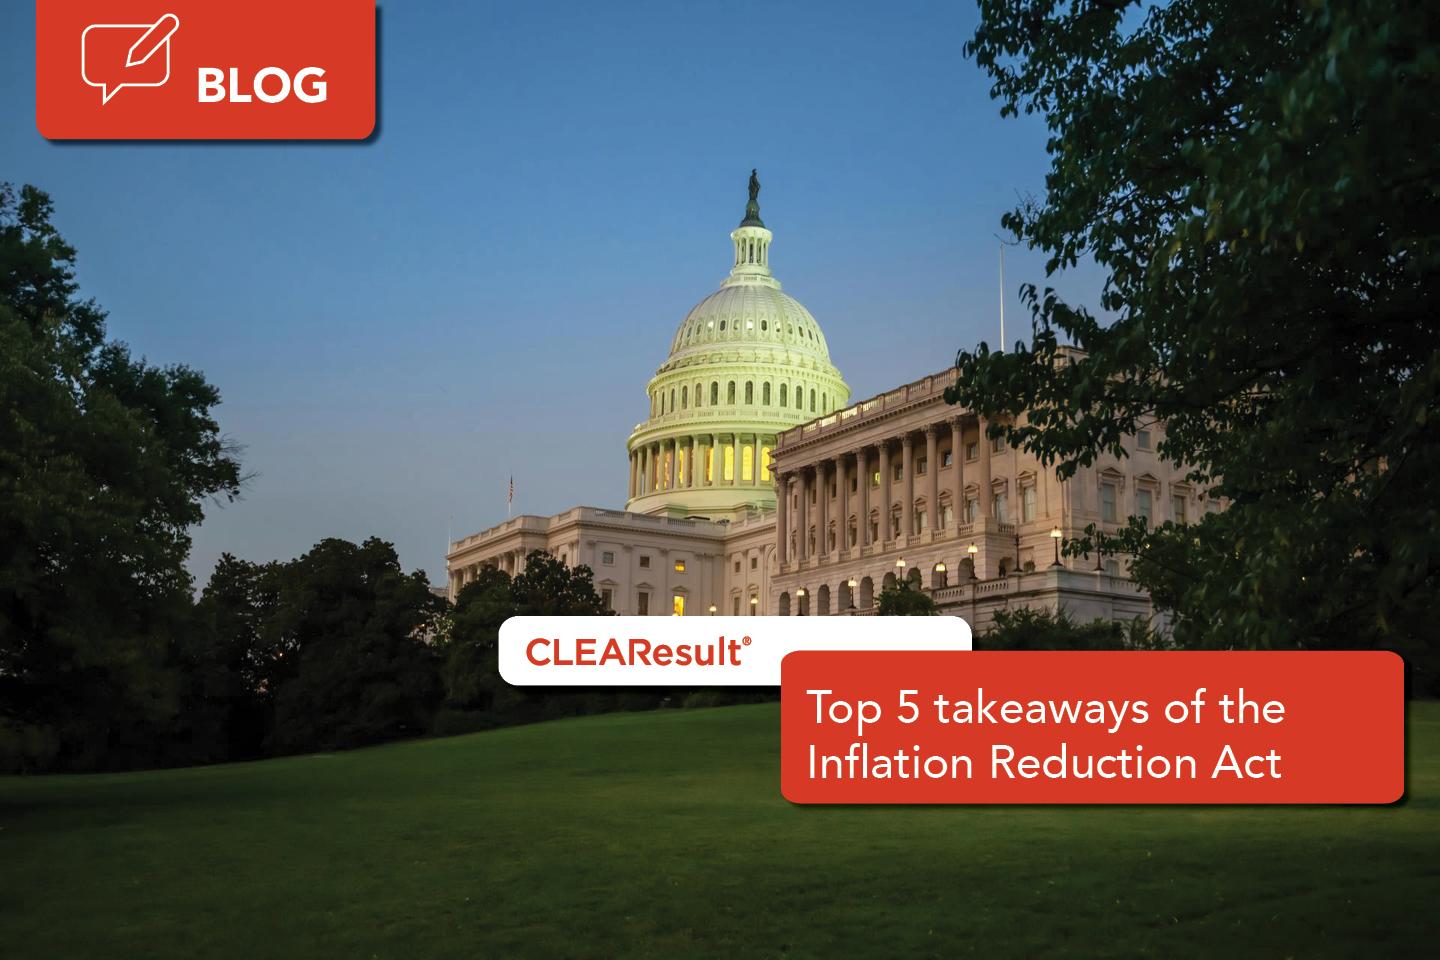 Top 5 takeaways of the Inflation Reduction Act (IRA)